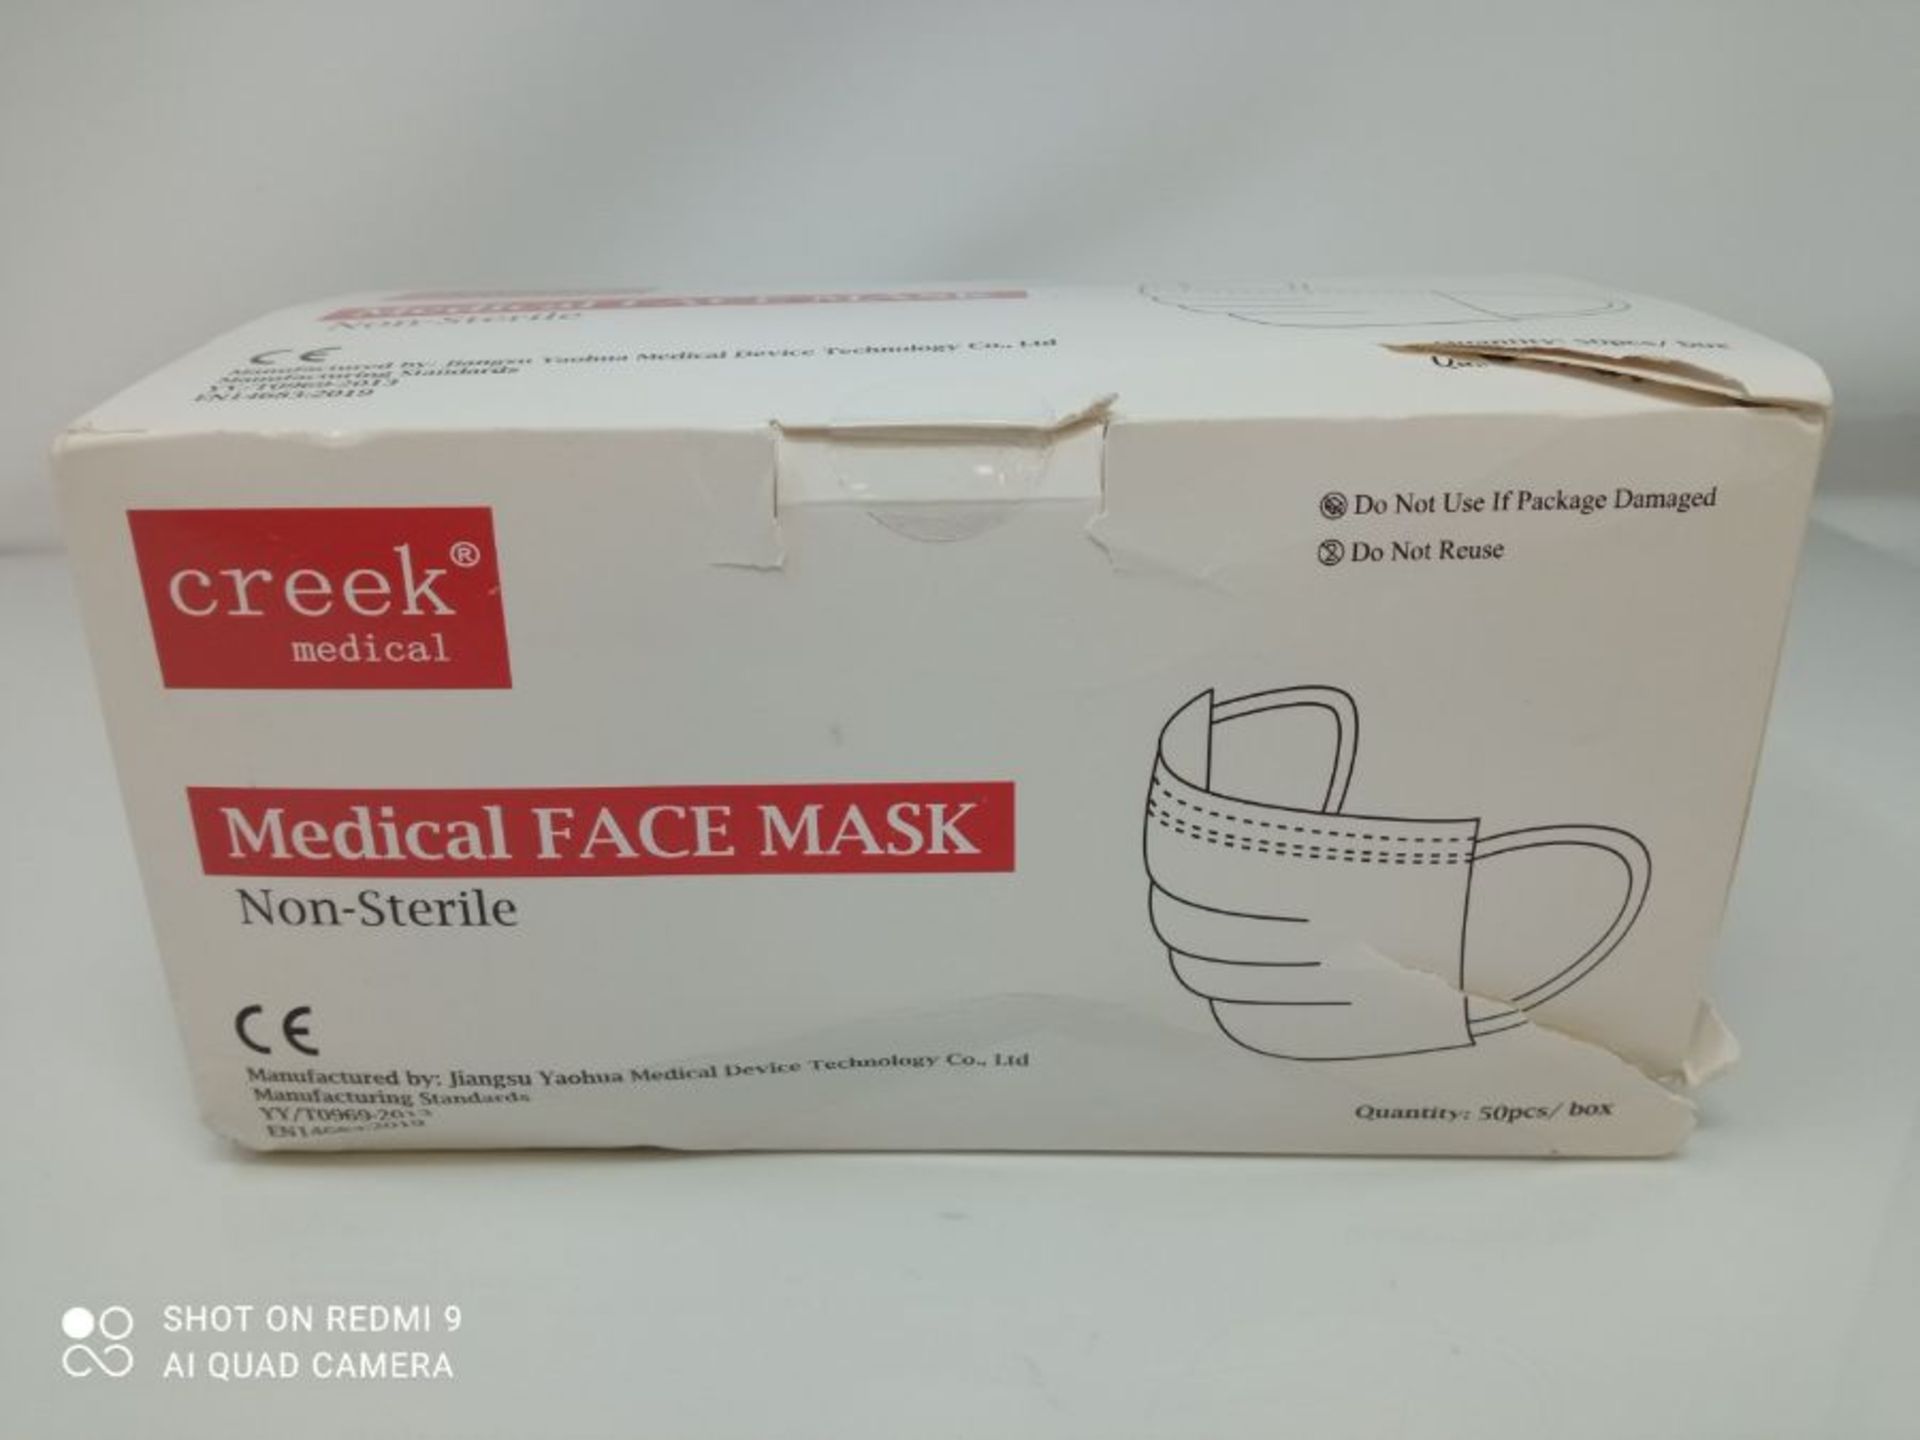 creek medical CE Approved and Tested 3-Layer Medical Surgical Mask Type I, Non-Sterile